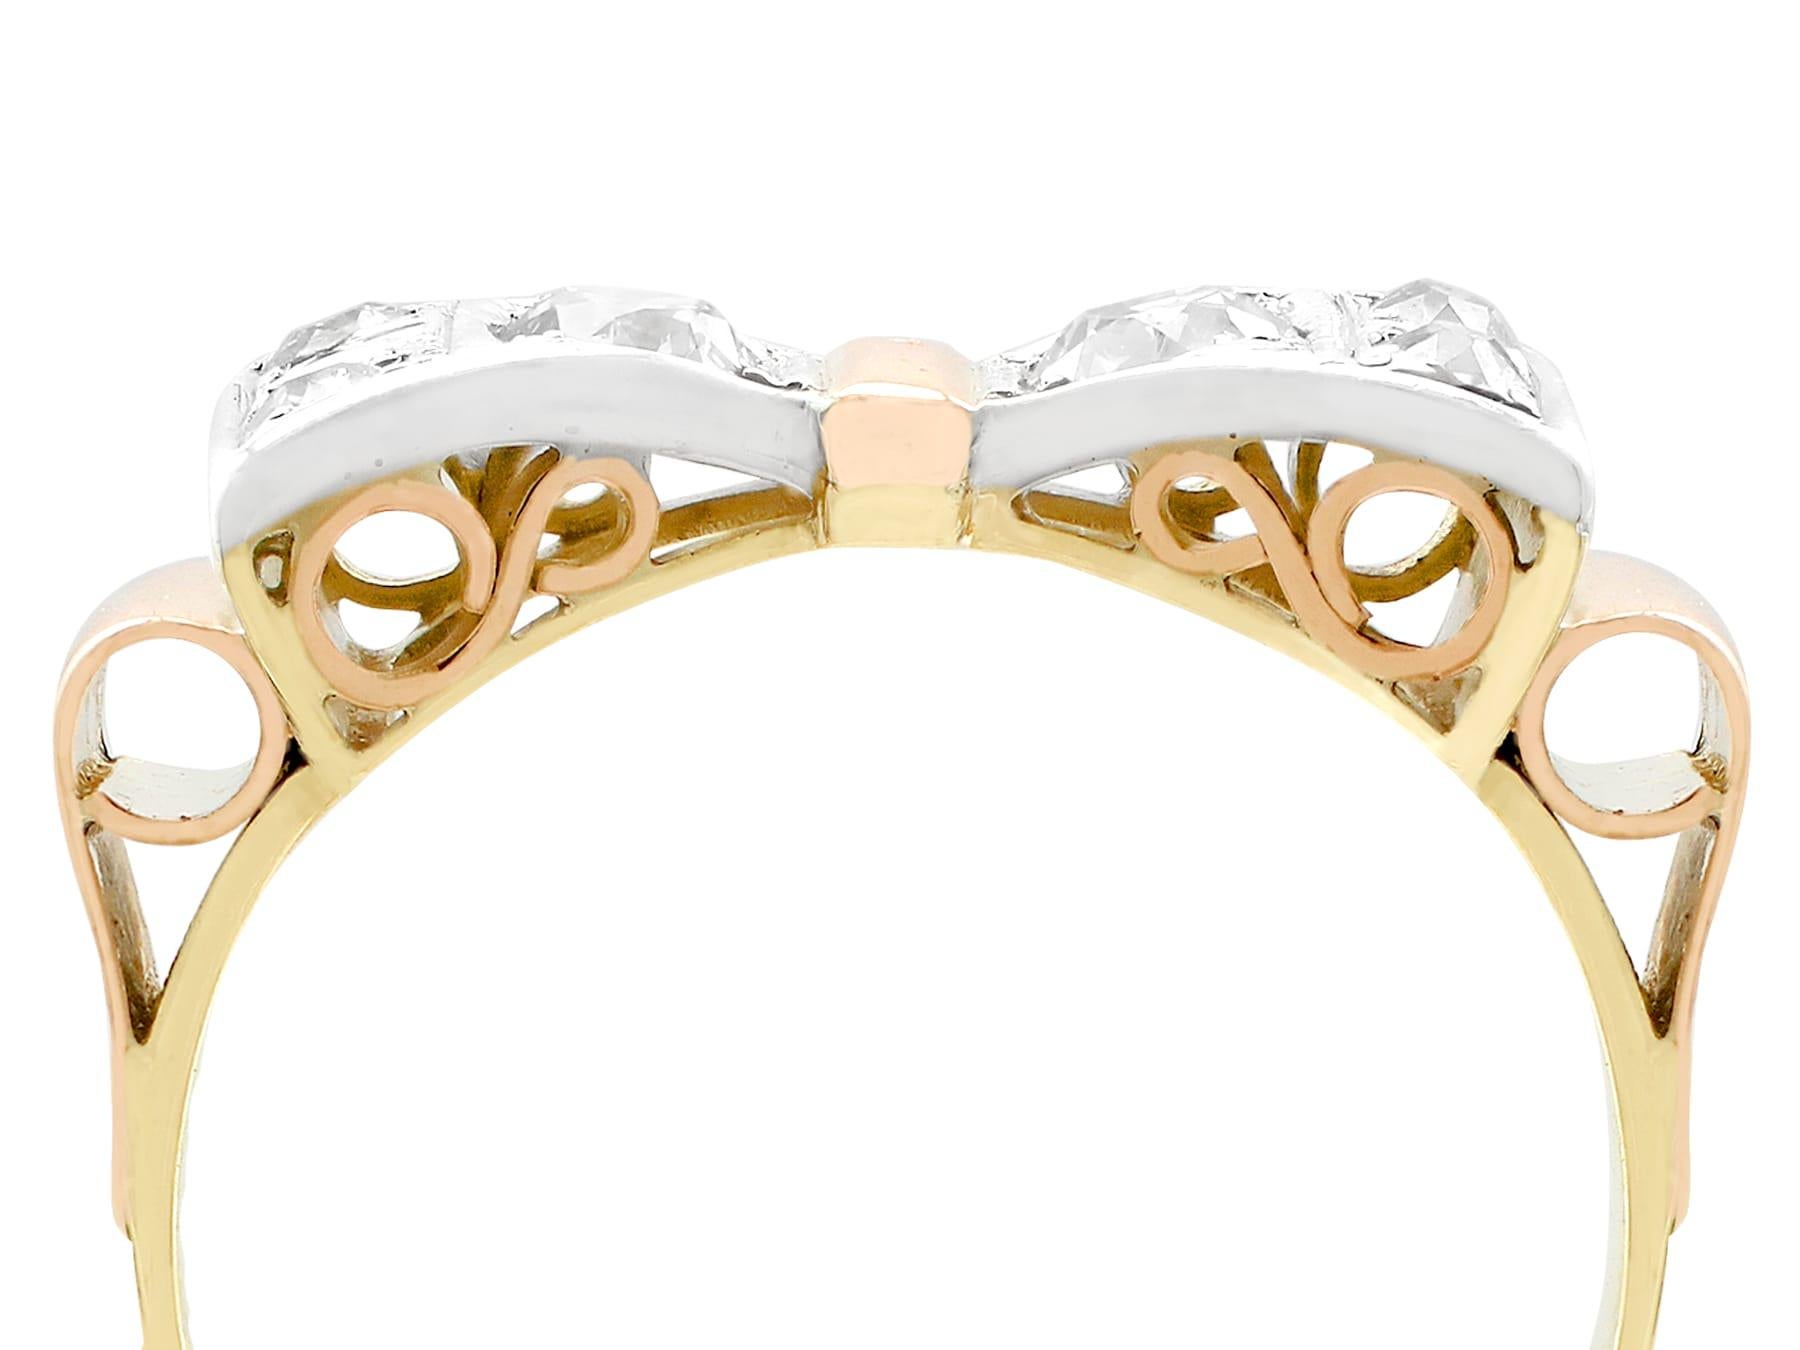 An impressive antique Dutch 0.42 carat diamond and 14 karat rose and yellow gold, silver set bow design dress ring; part of our diverse antique jewelry and estate jewelry collections.

This fine and impressive antique diamond band ring has been